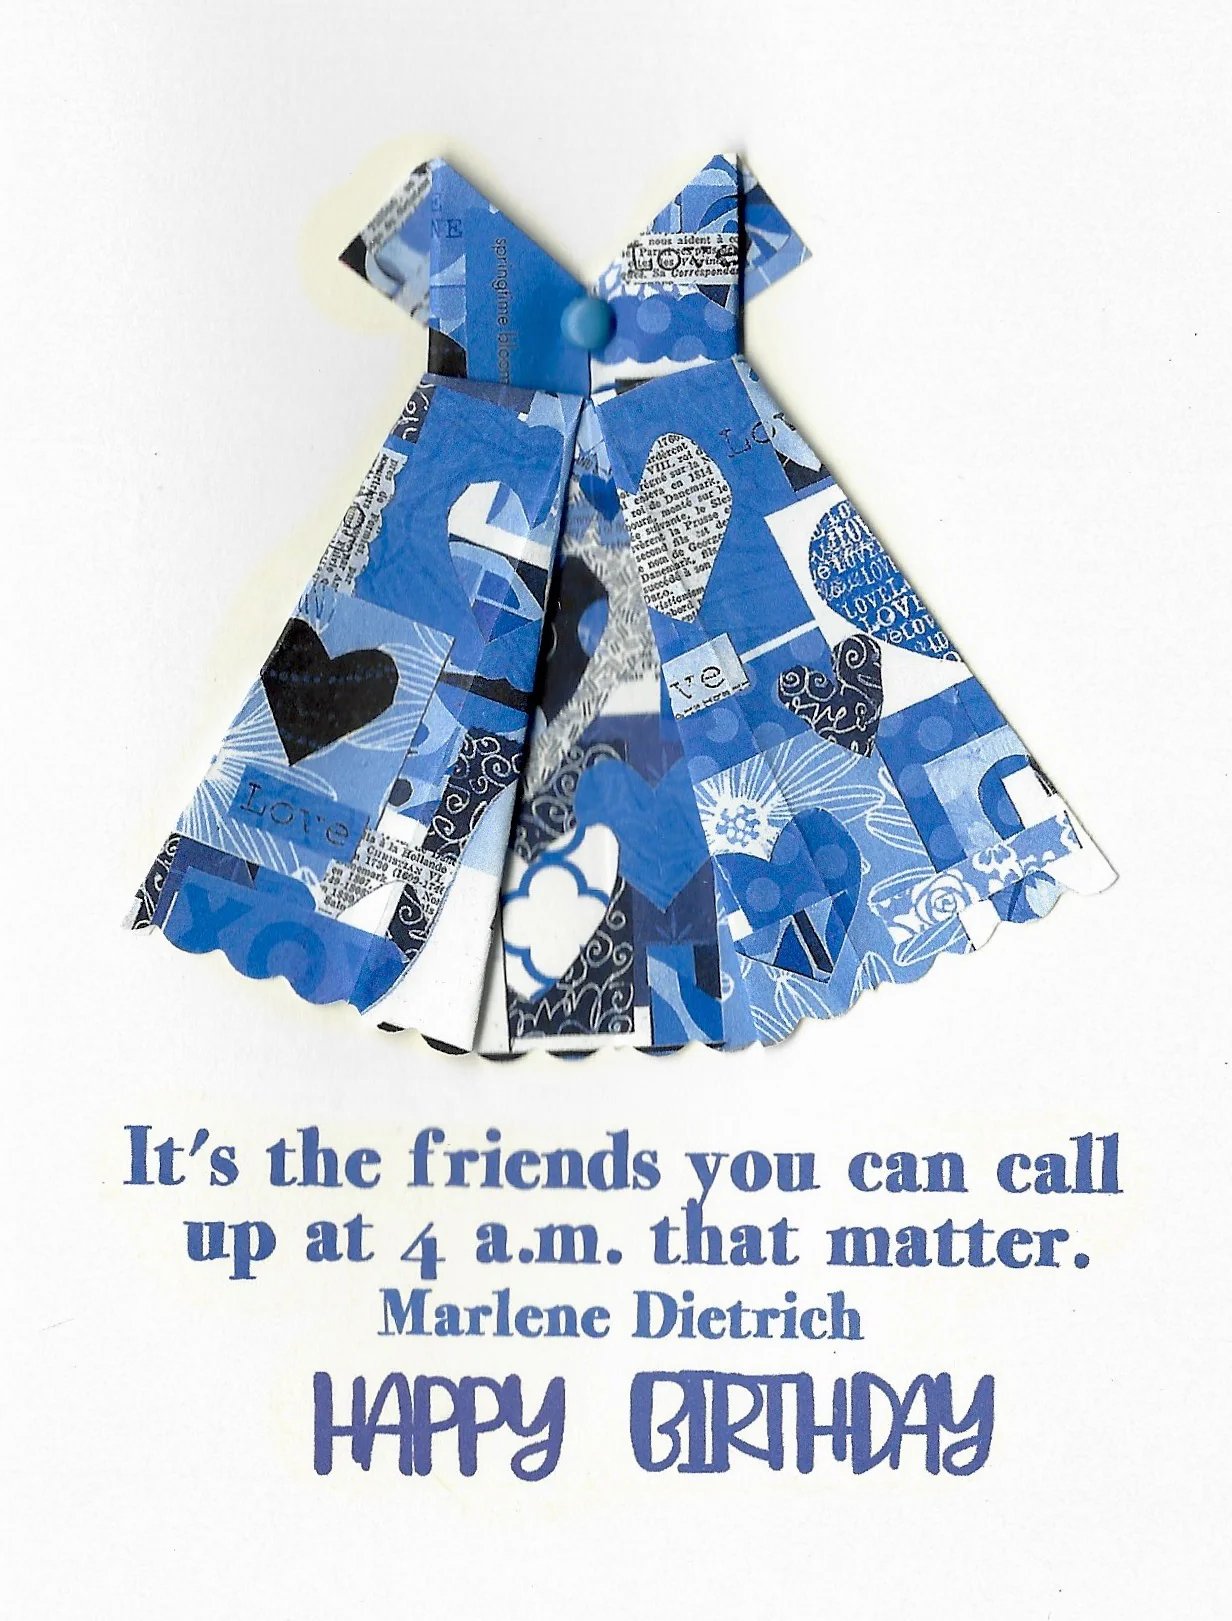 It's the friend that you can call ... birthday card Virginia Fitzgerald